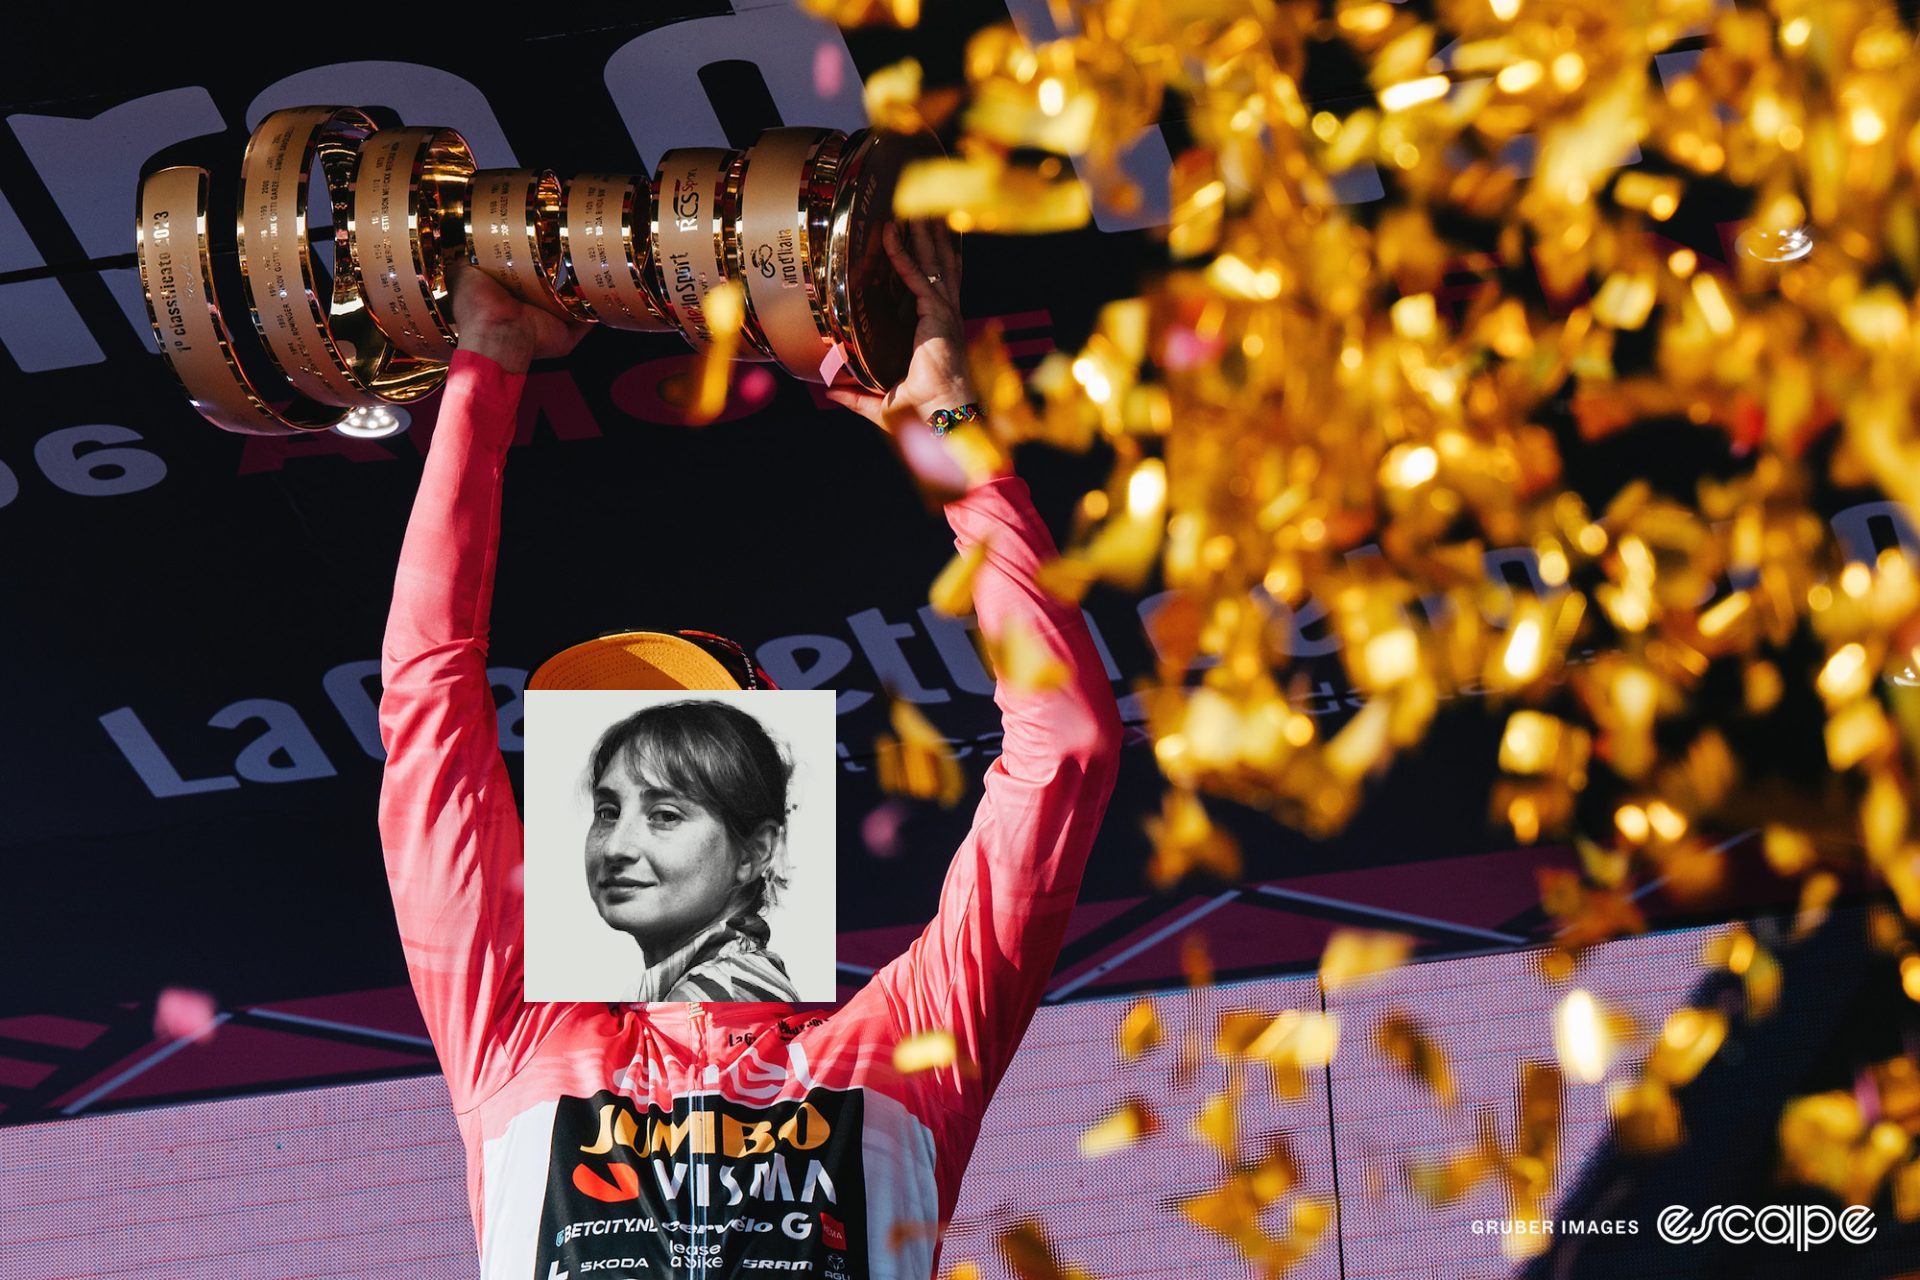 Primož Roglič holds the Giro d'Italia trophy over his head on the podium. Kate Wagner's profile photo is jankily edited in place of his face.